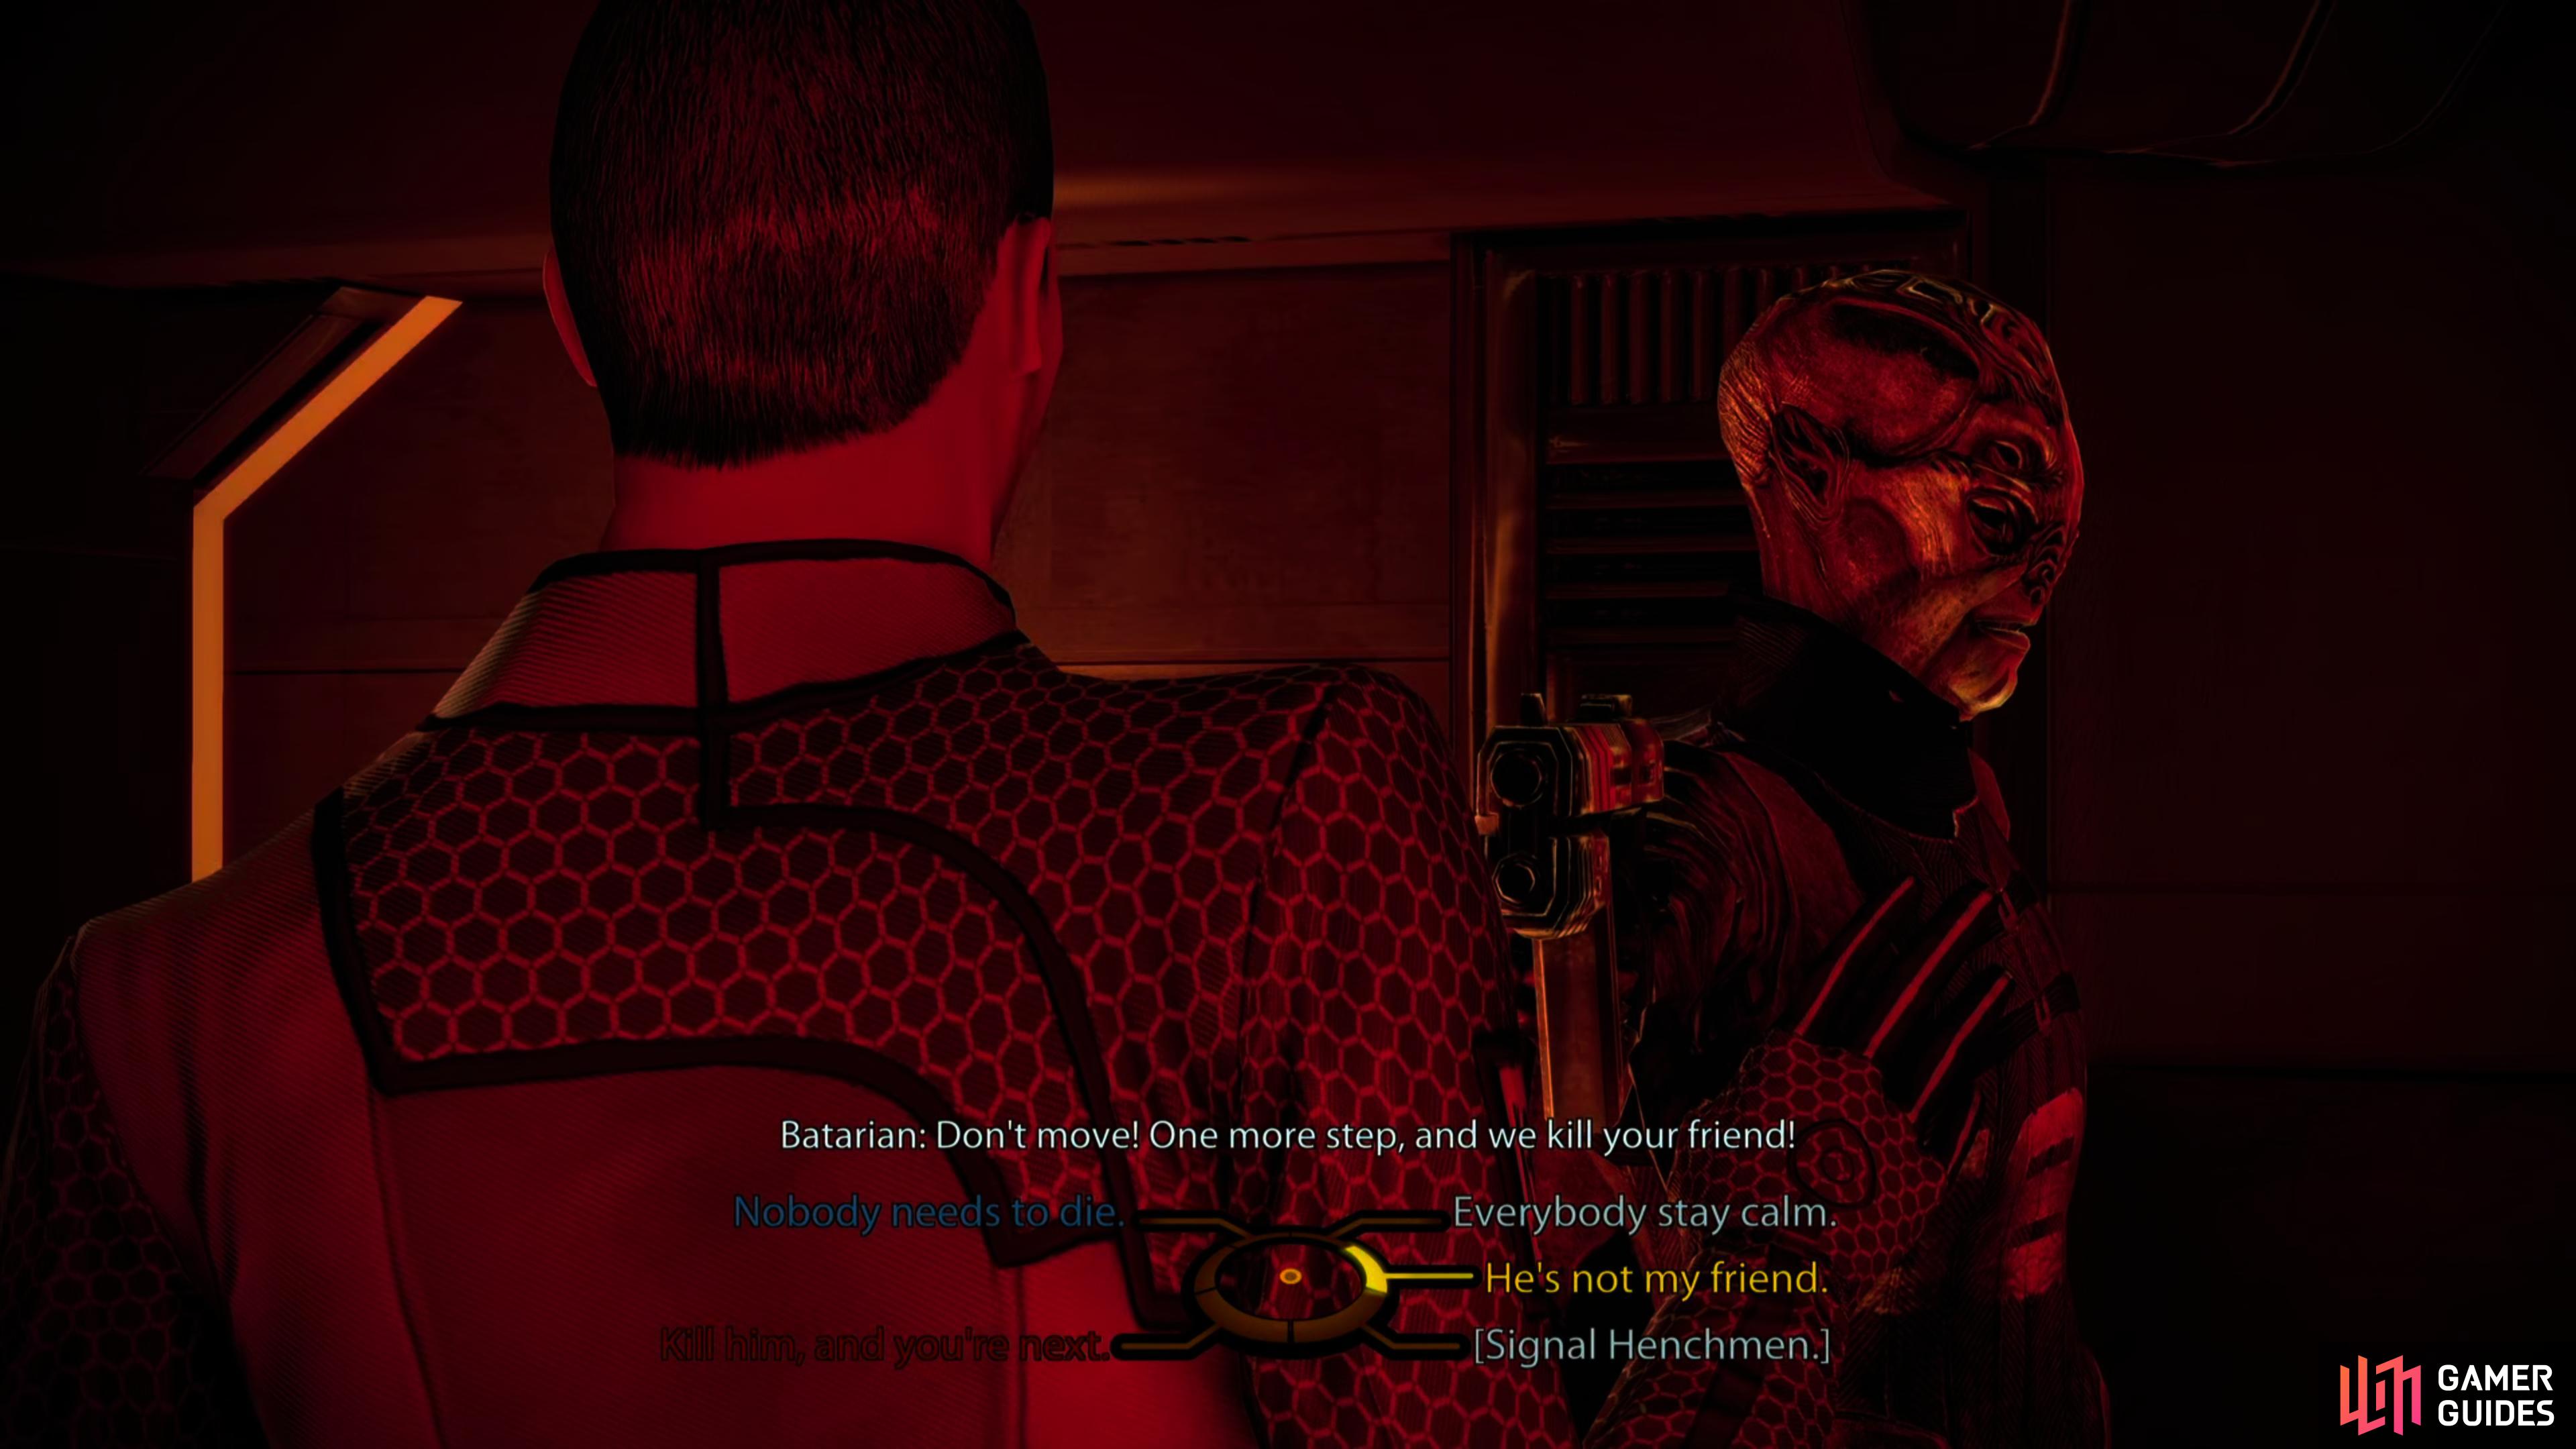 and Mordin's assistant Daniel, who ran afoul of some Batarians. Play the peacemaker or threaten them, after which you can let them go, or kill them.